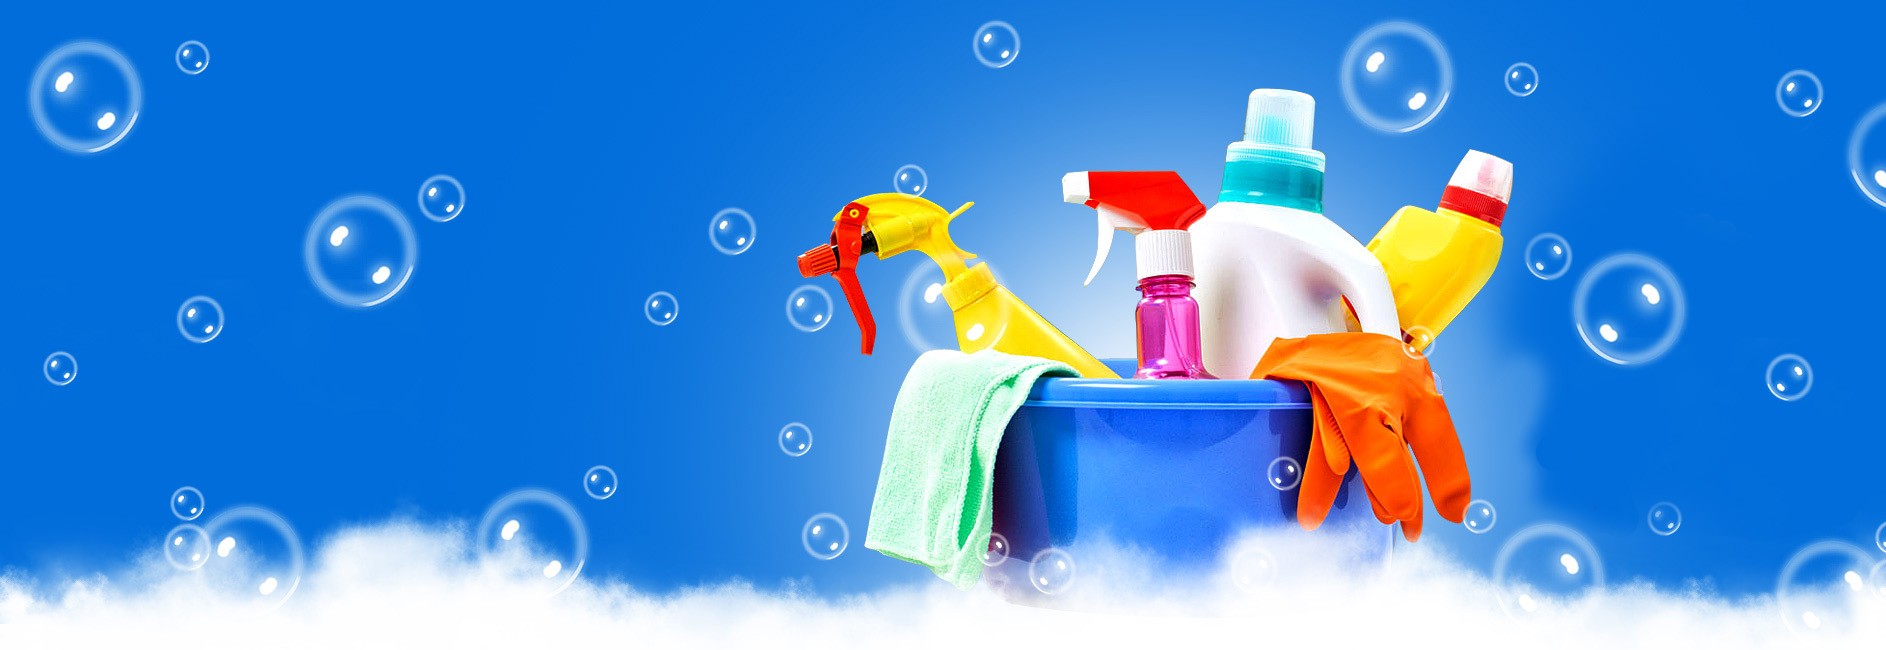 WE ARE THE BEST BUDGET AFFORDABLE CLEANING COMPANY IN KING COUNTY.